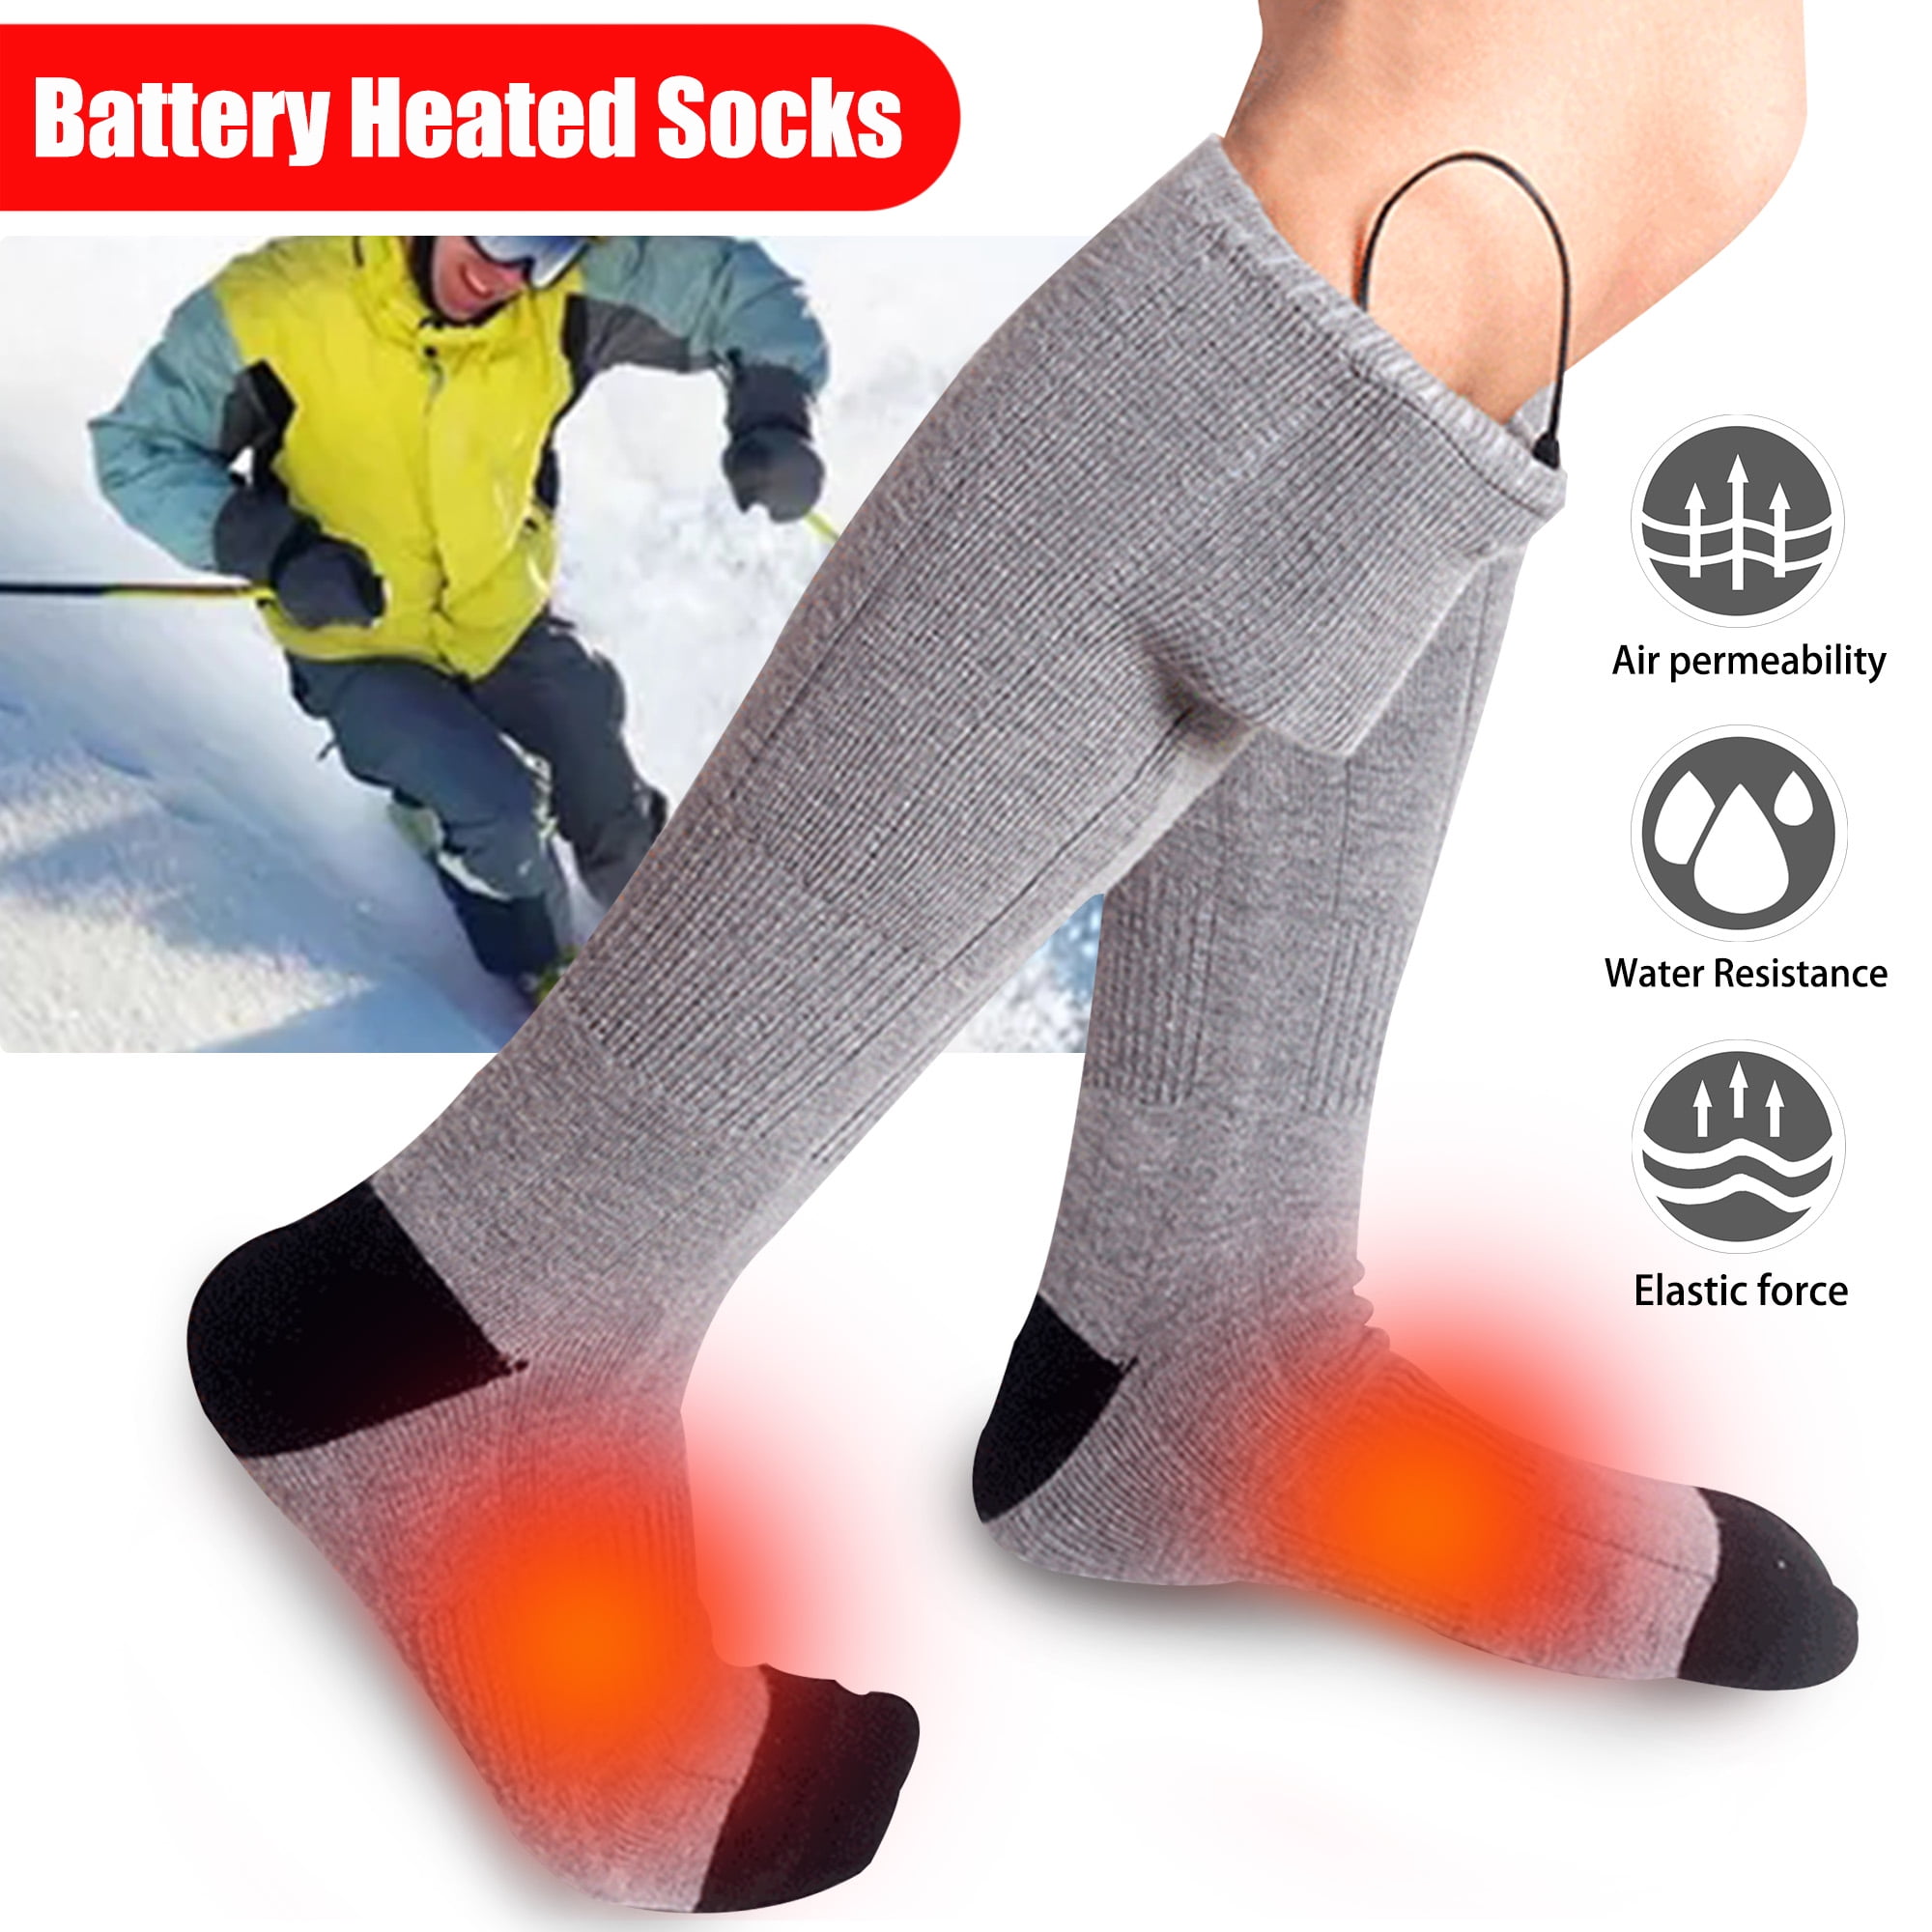 Upgraded Heated Socks 3.7V 2200MAH Electric Rechargeable Battery Heating Sock!! 